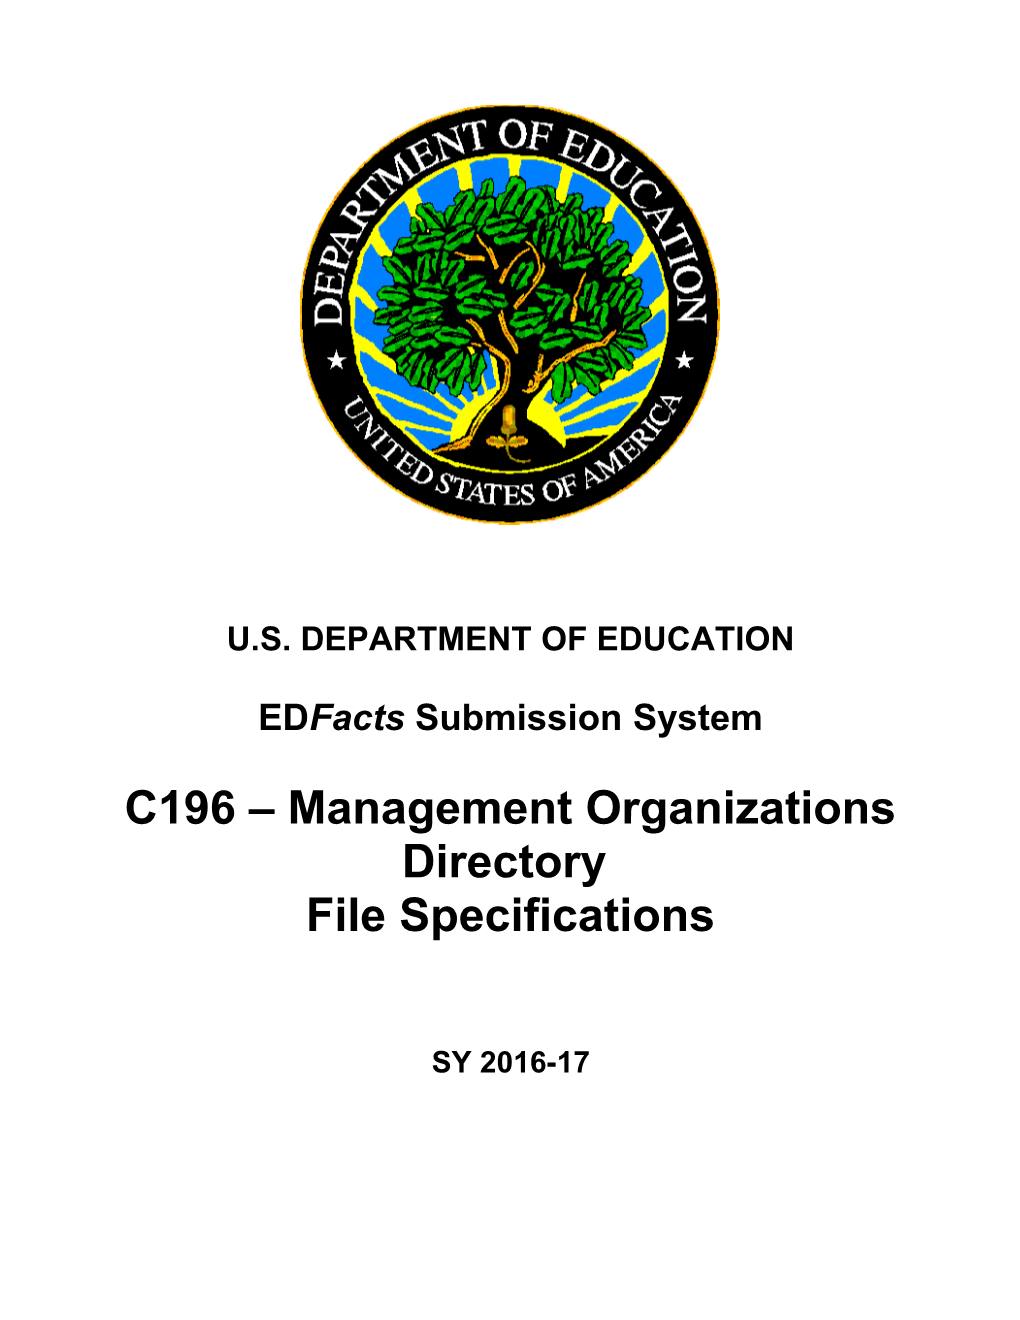 C196 - Management Organizations Directory File Specifications (Msword)